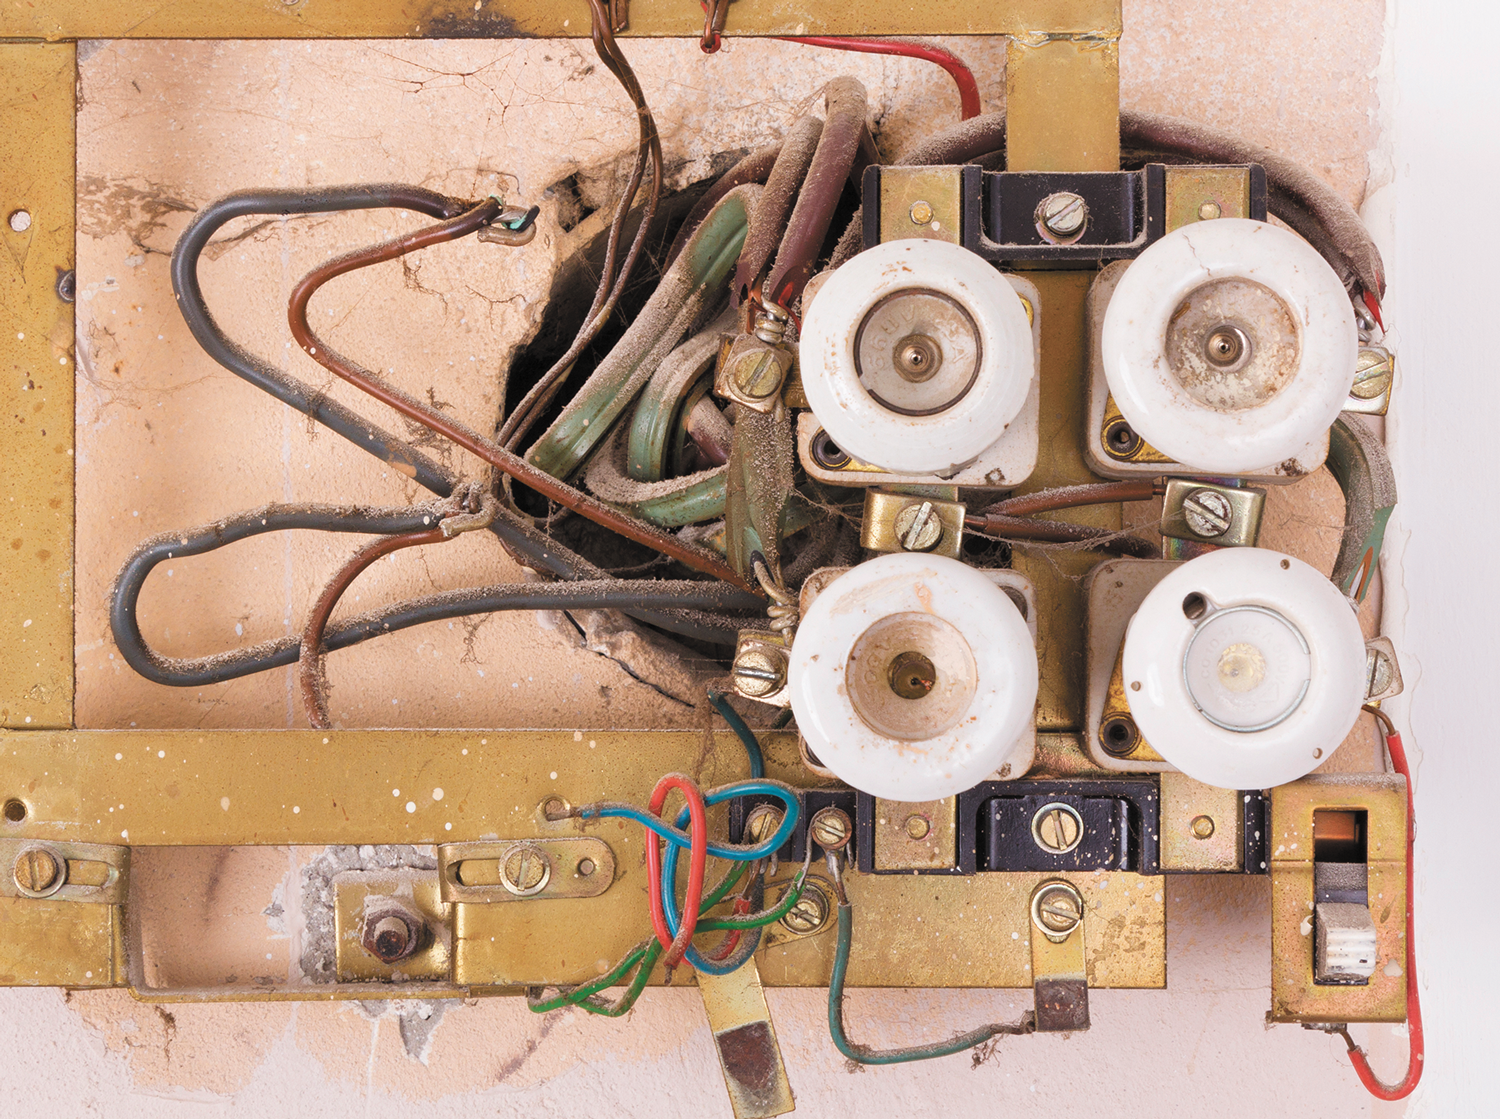 Knob-and-tube electrical wiring is best left to the professionals.